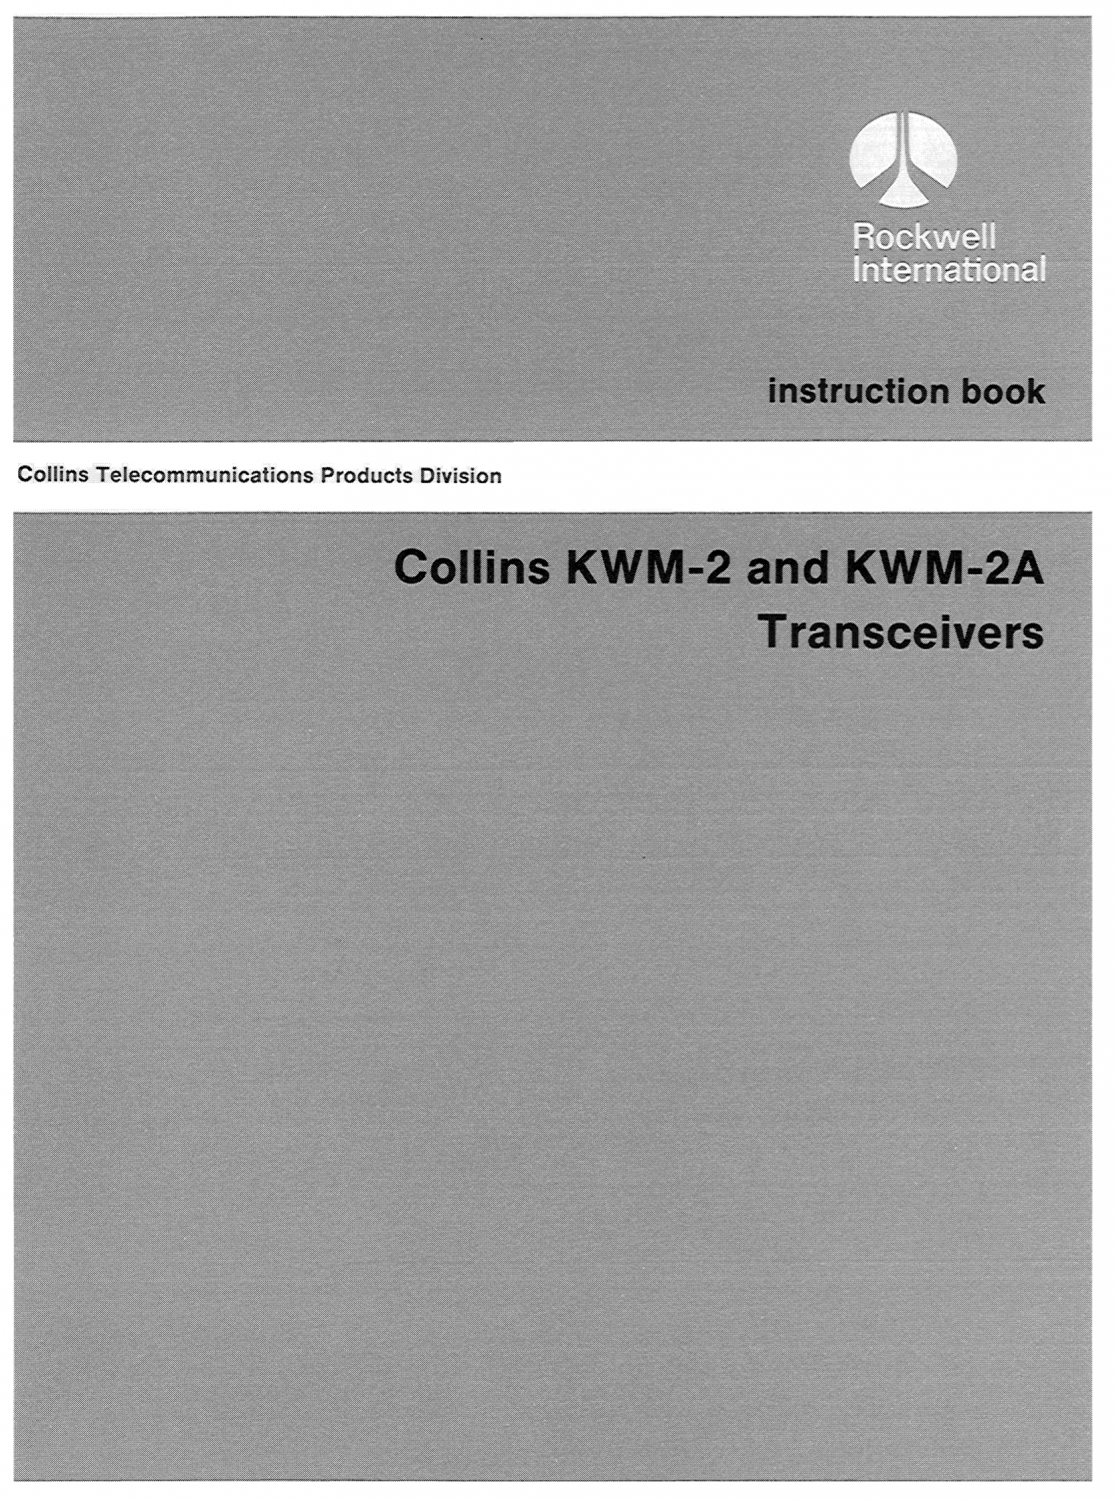 Collins KWM-2 Transceiver - Instruction Book - 9th Edition (1978-01)